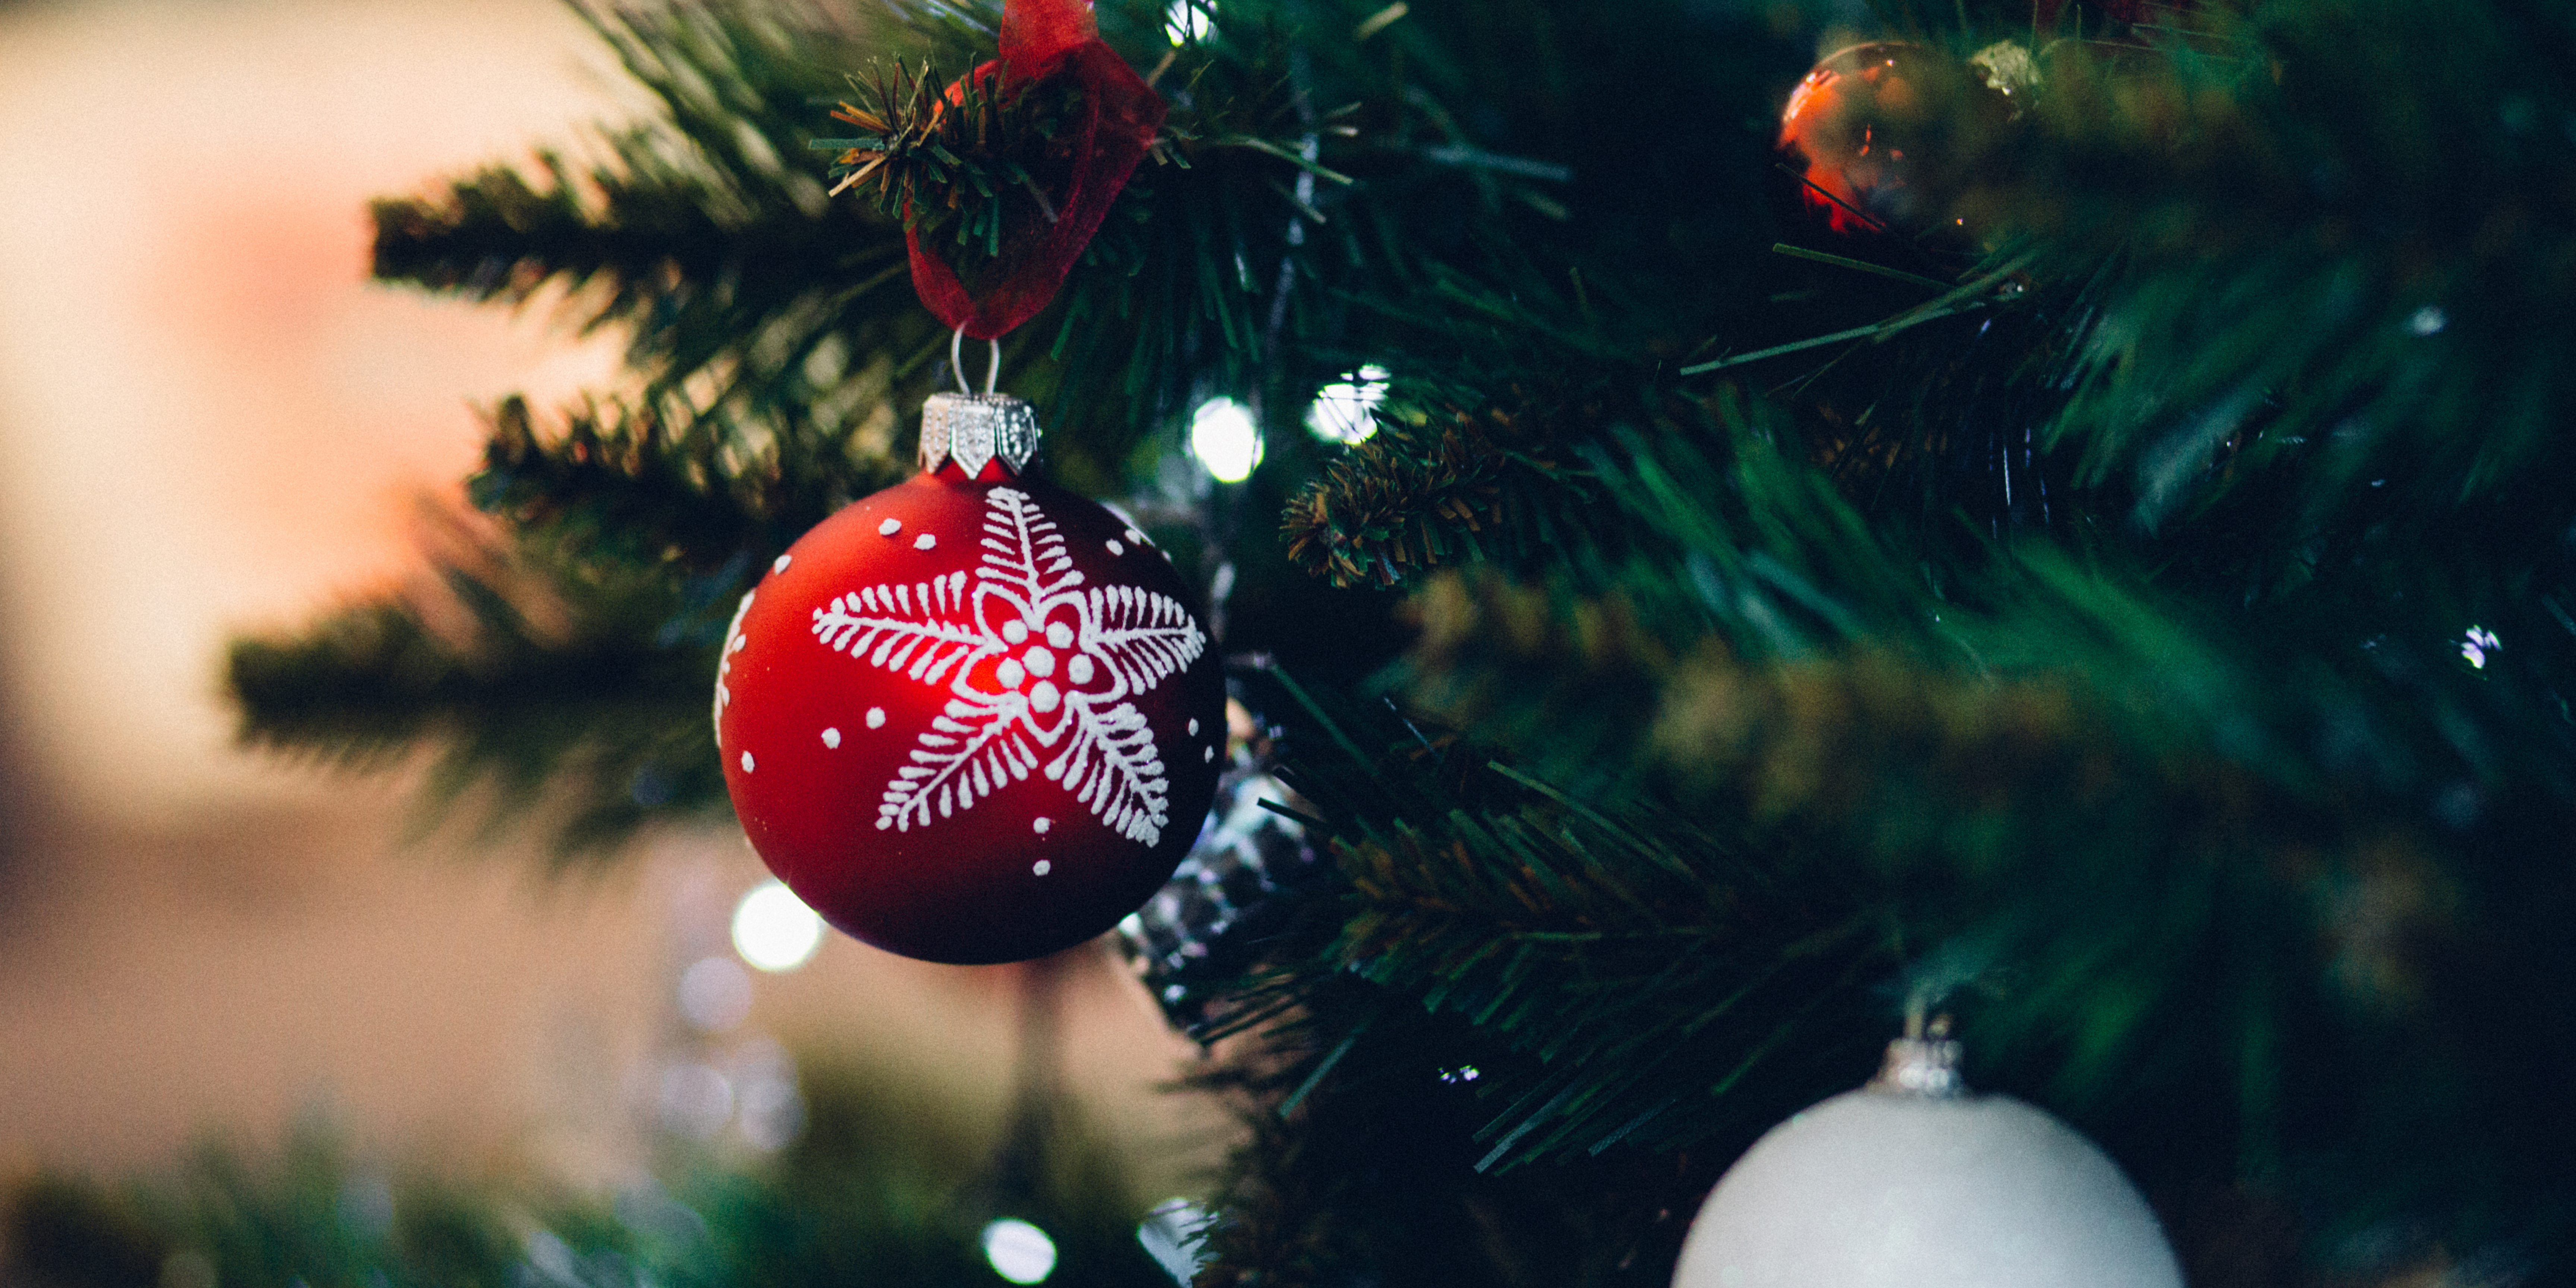 3 Ways to Have a Meaningful Christmas in Corporate Housing